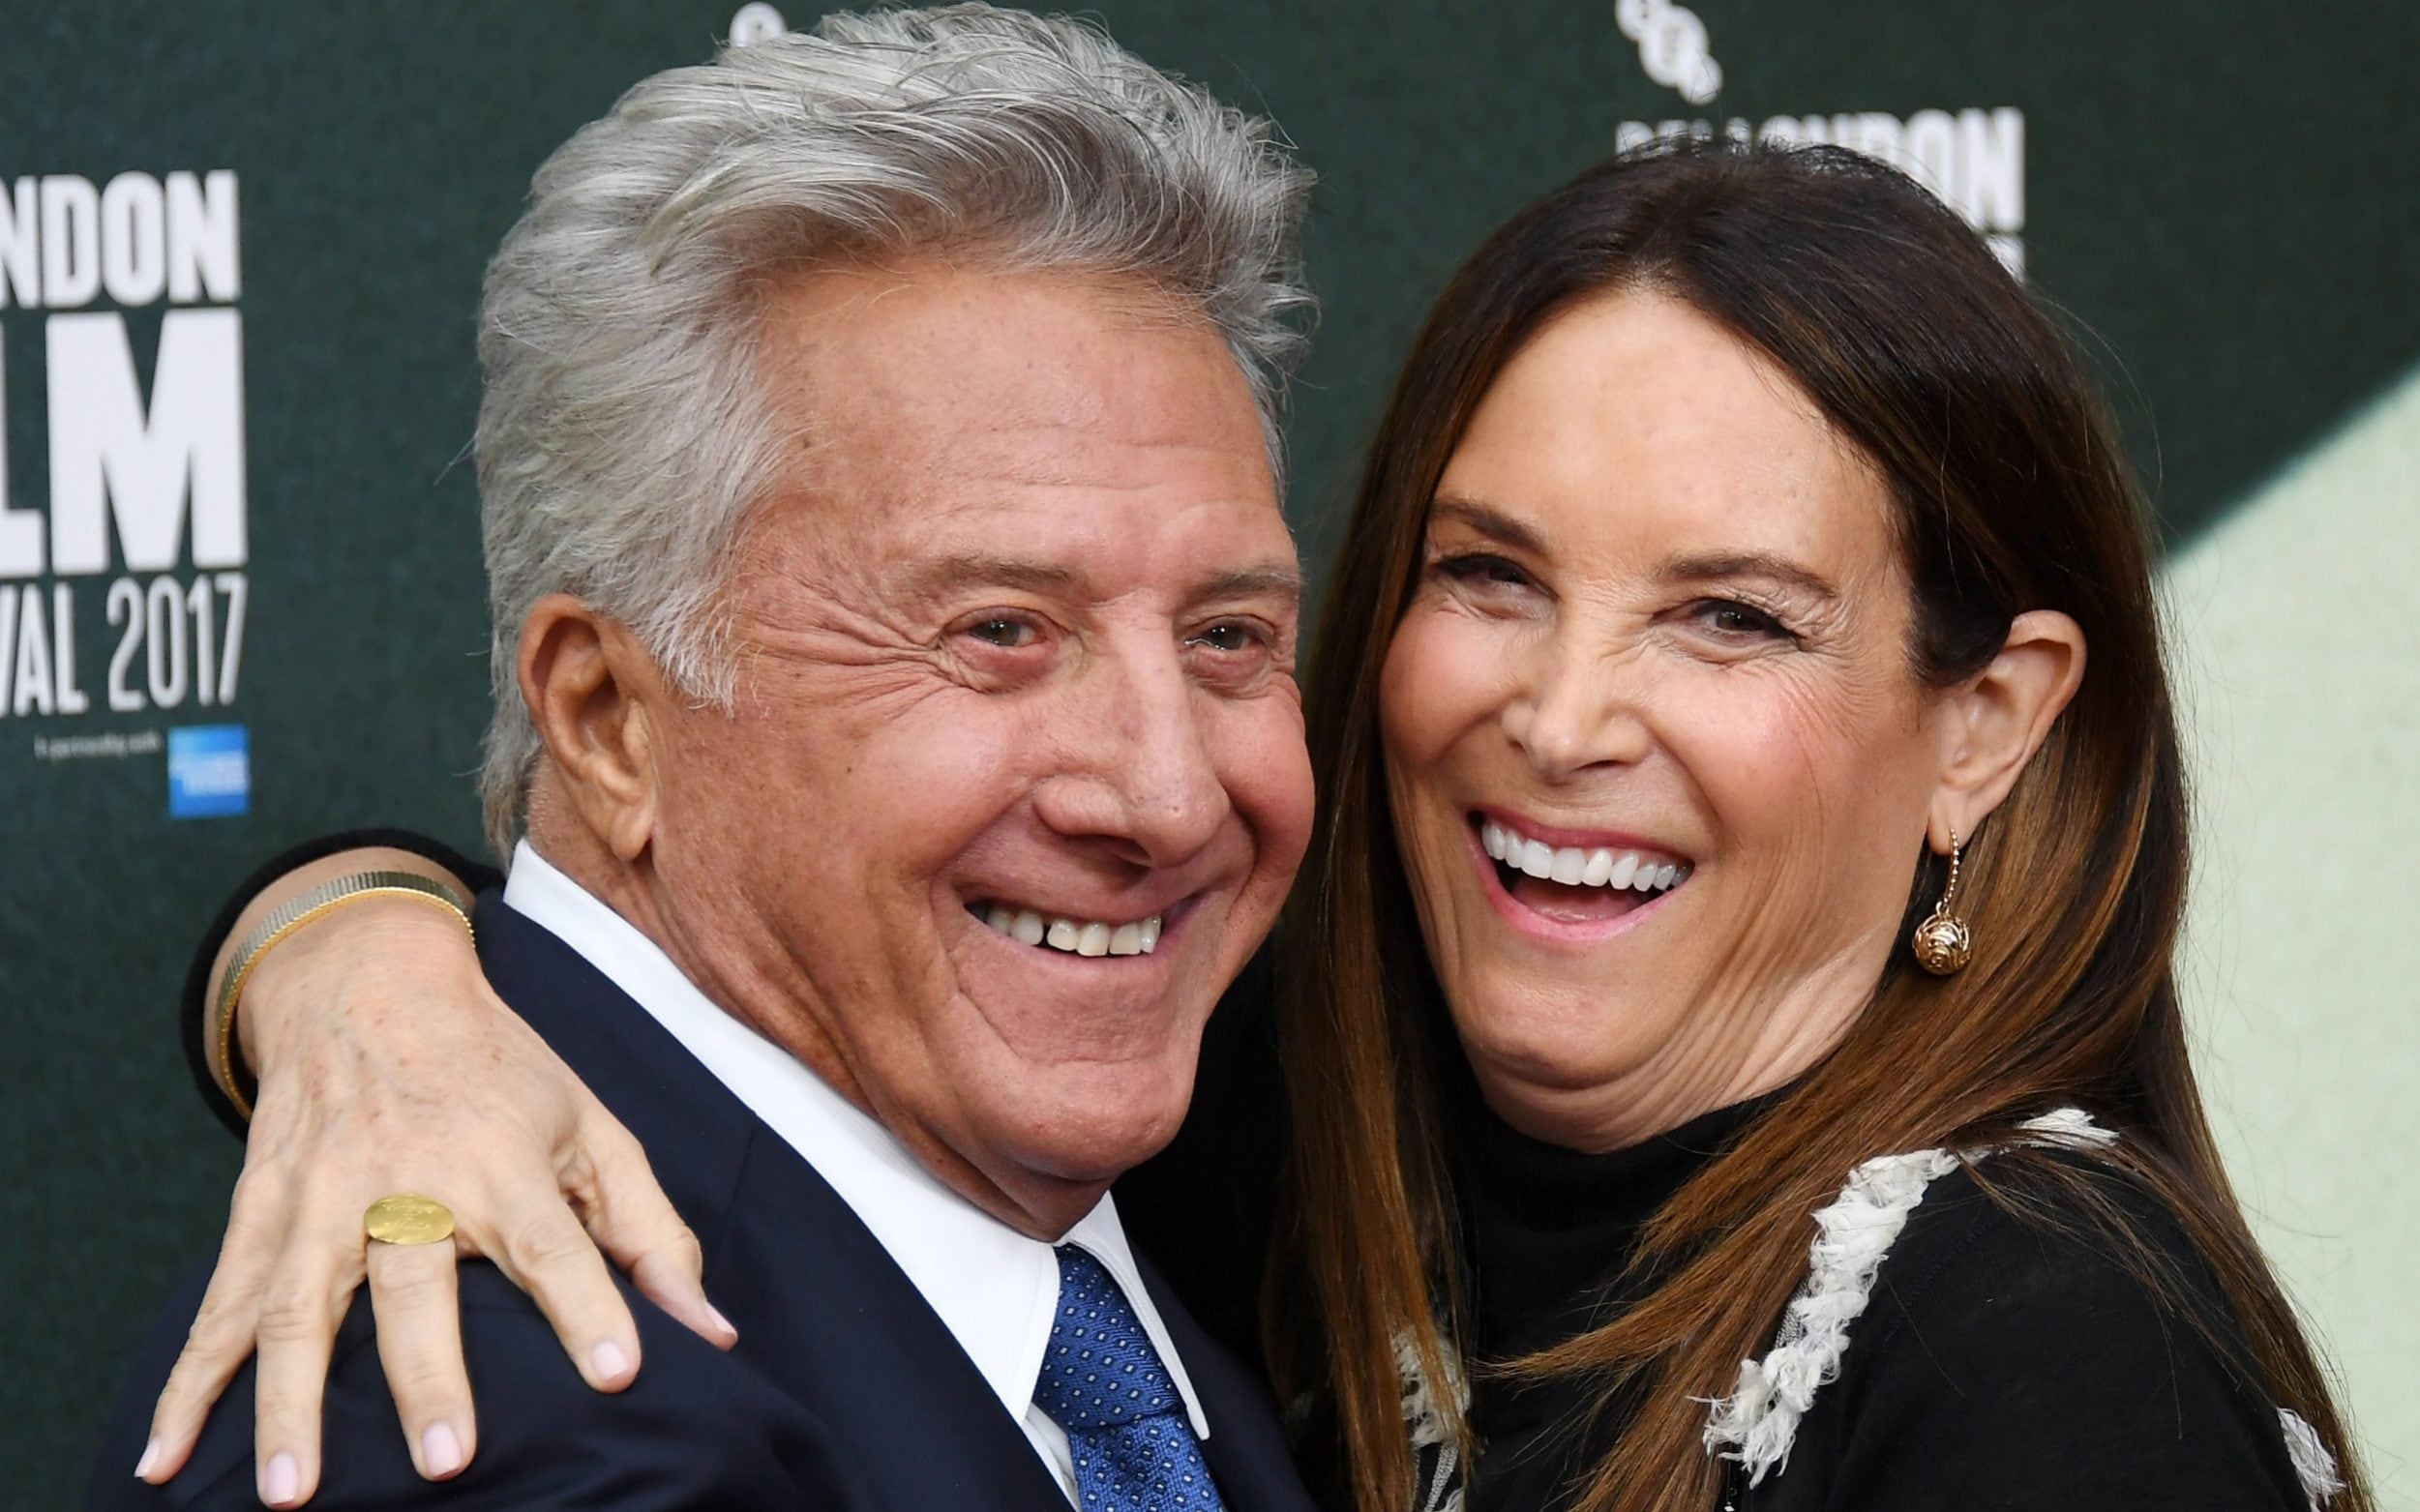 Dustin Hoffman Wiki, Bio, Age, Net Worth, and Other Facts